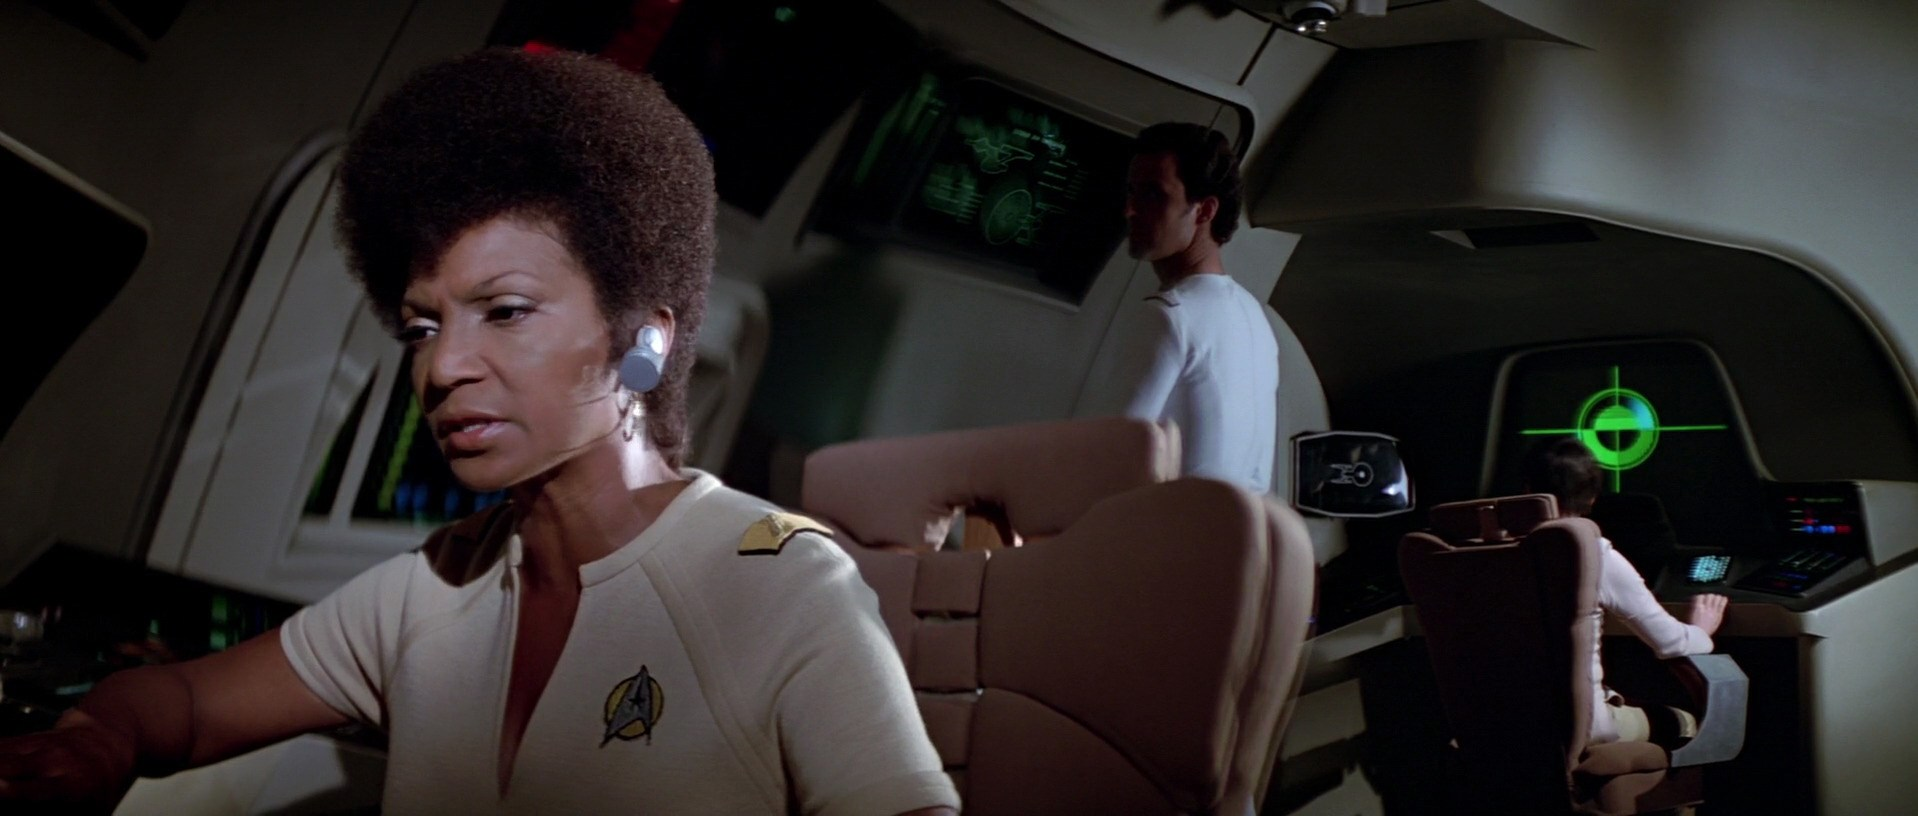 Uhura wearing a pale brown uniform sits at the communications station.